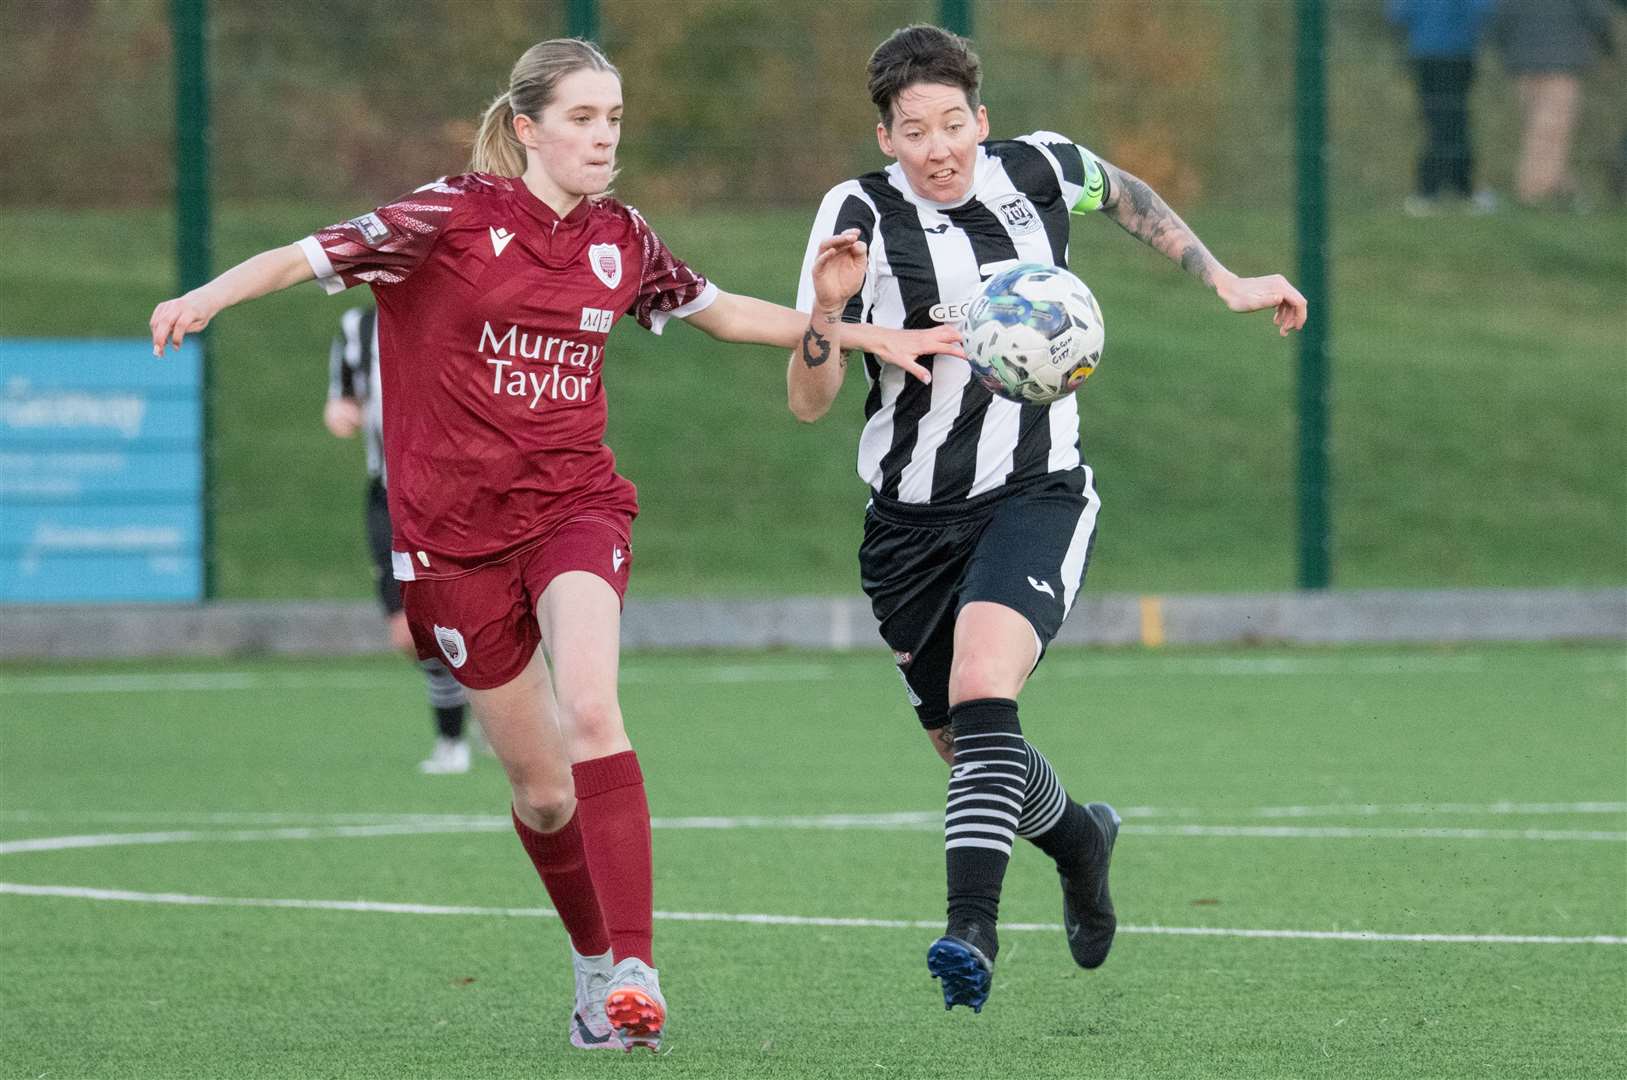 Jess Moore, pictured here in action for Elgin City, opened her Buckie Ladies account in style with a four-goal fusillade. Picture: Daniel Forsyth.